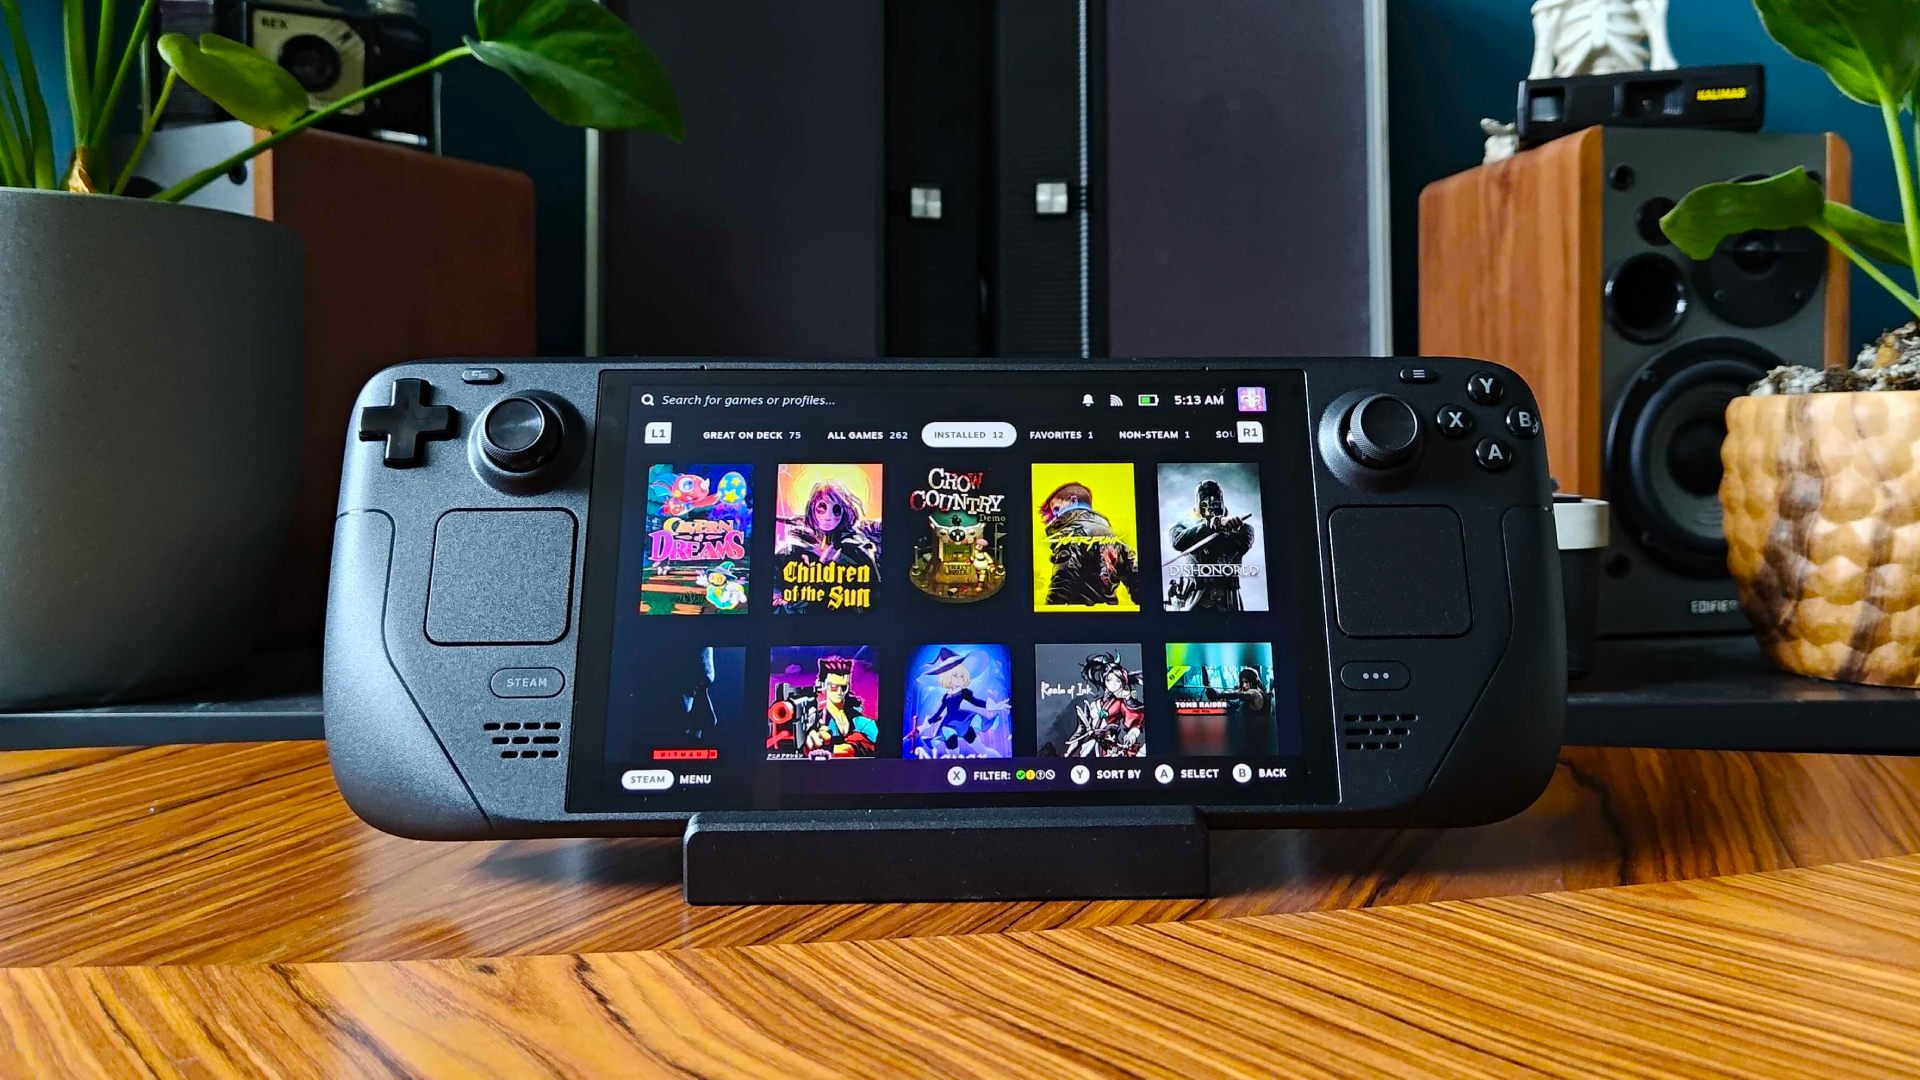 Steam Deck OLED review: “Valve's new handheld has reclaimed my 